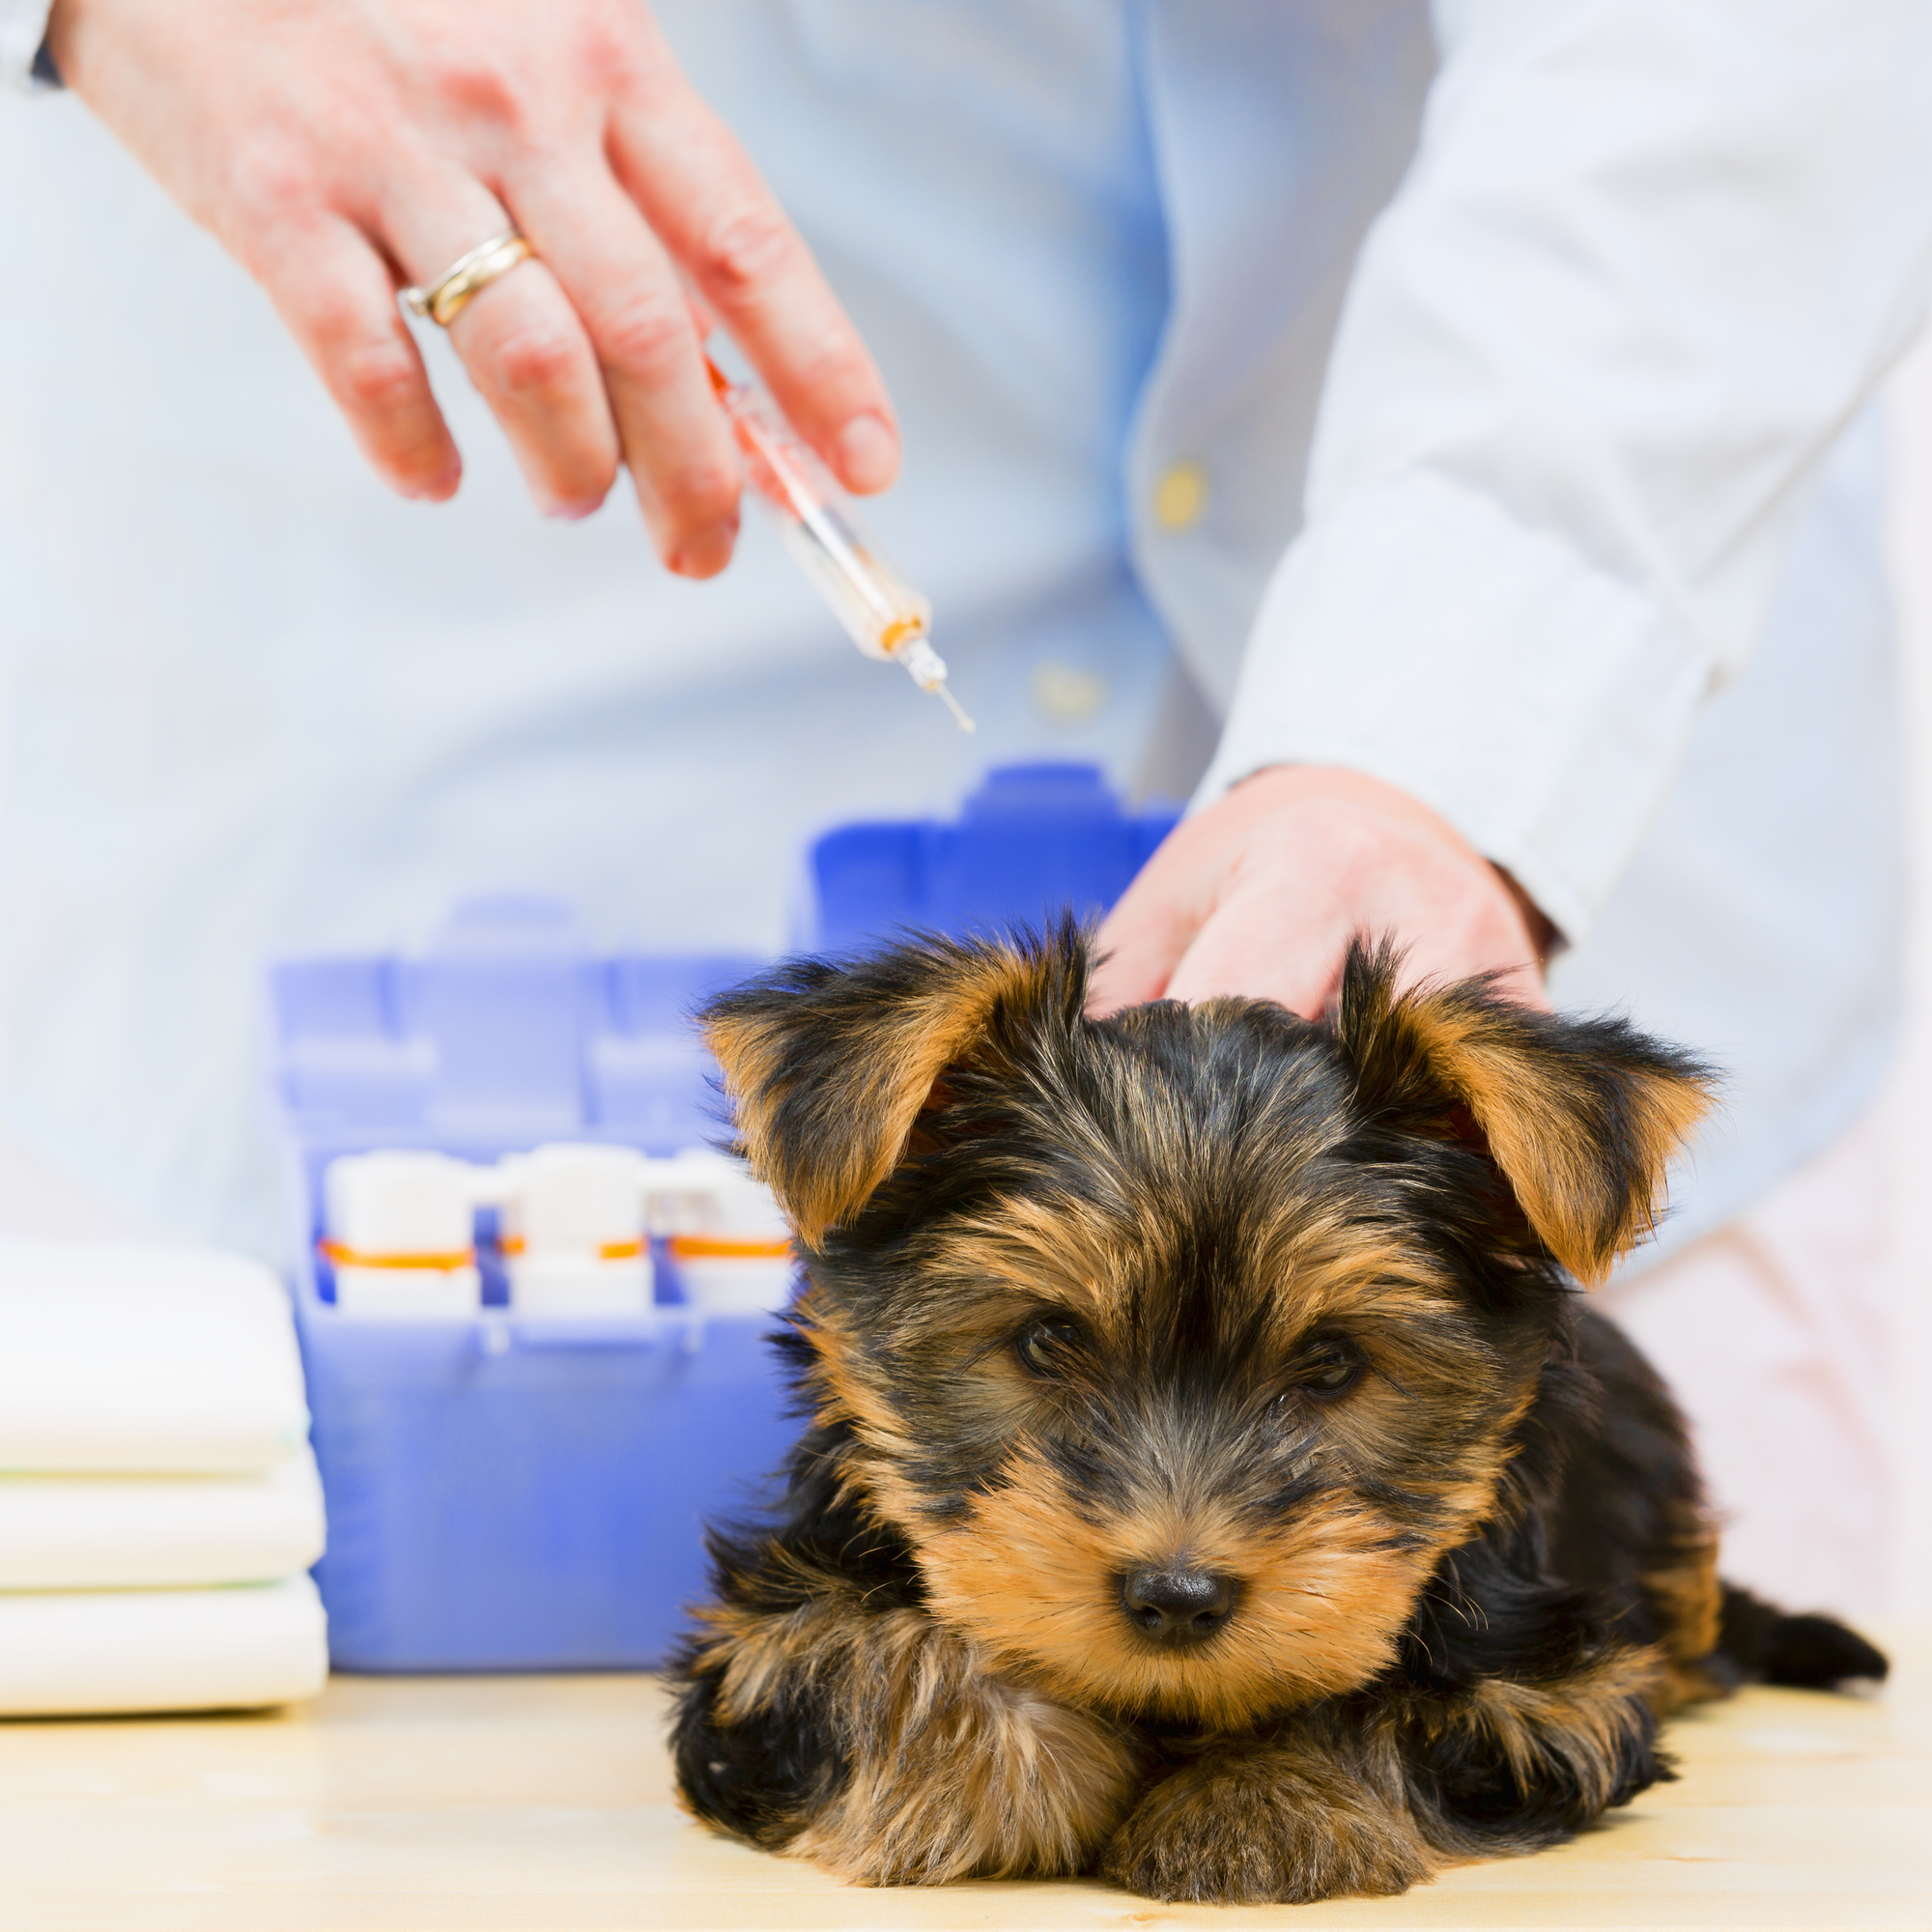 Veterinary treatment – vaccinating the Yorkshire puppy